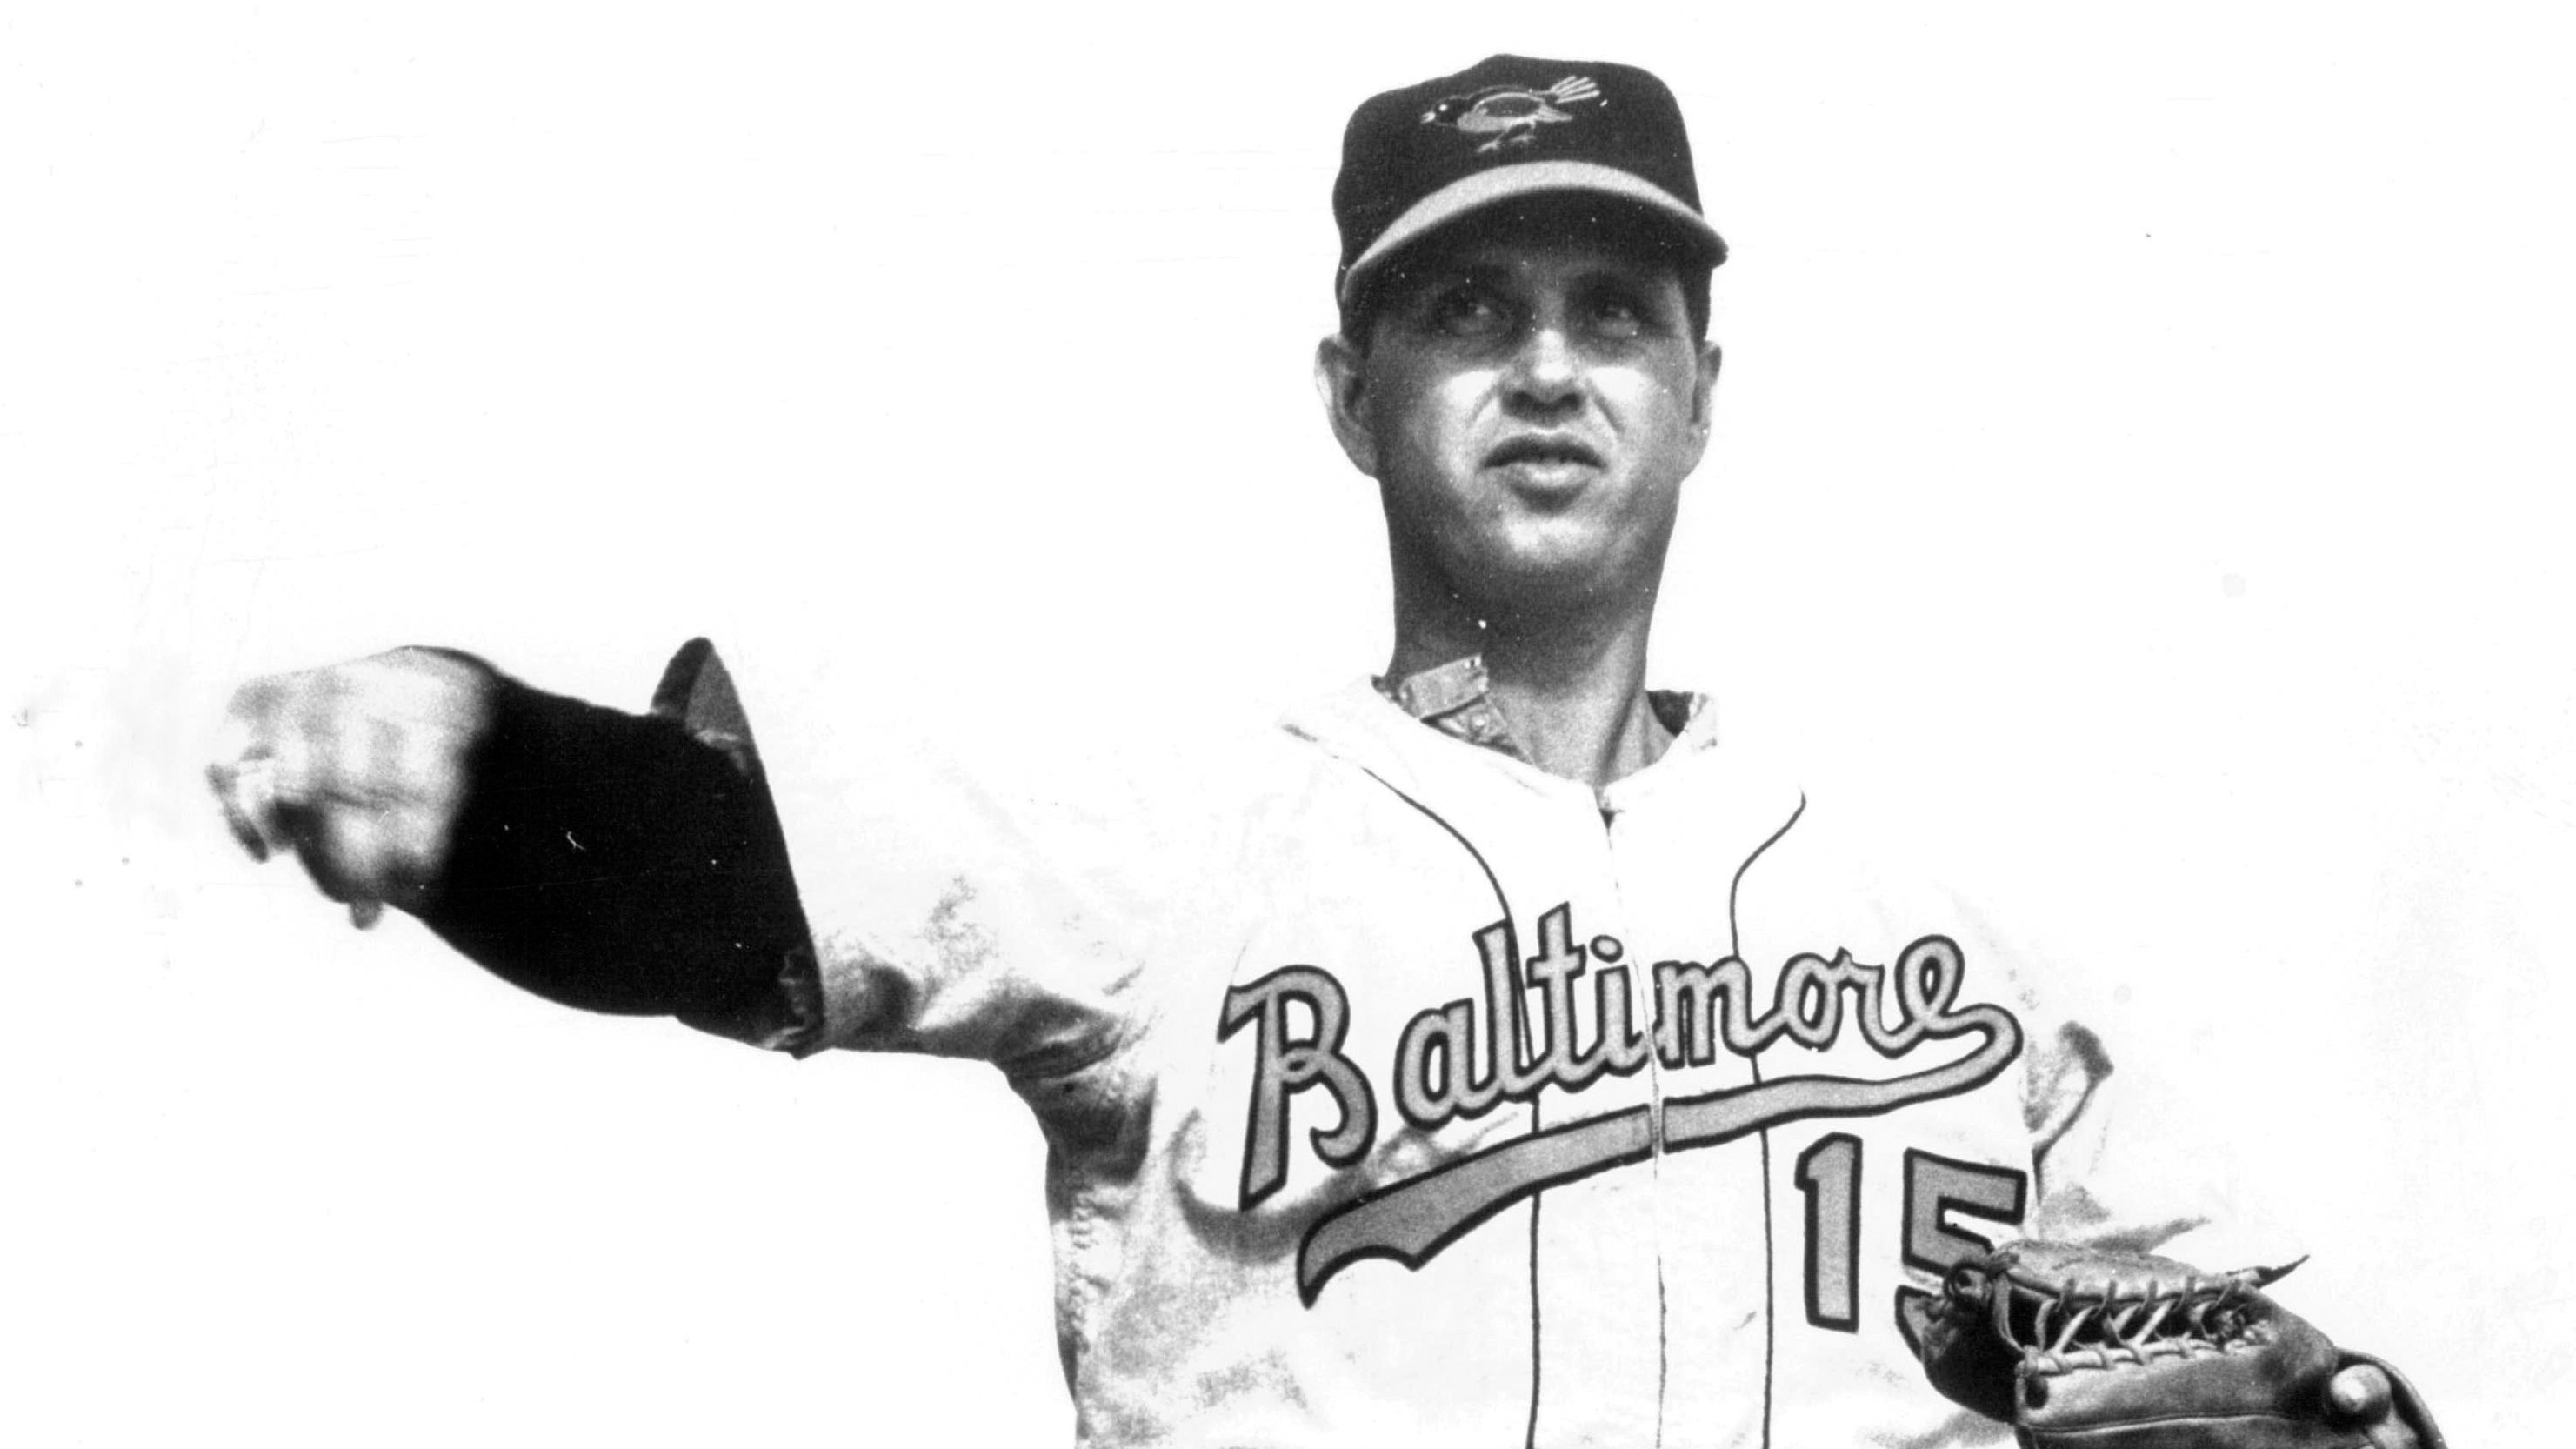 On June 2, 1959, Orioles pitcher Hoyt Wilhelm, pictured in 1962, was chased from the mound by a cloud of gnats that encircled the mound at Chicago's Comiskey Park.